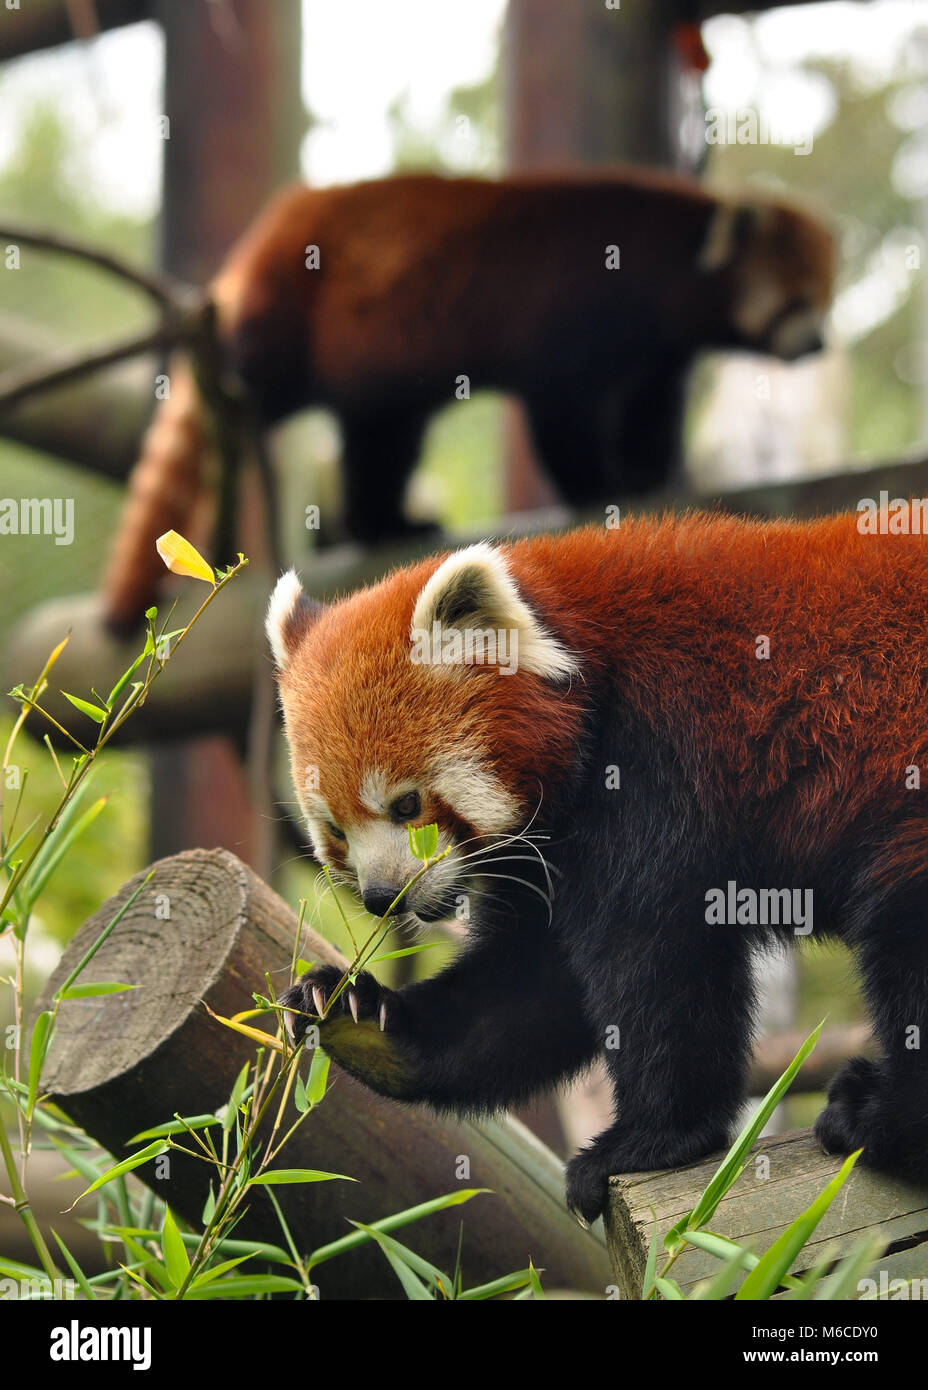 Pair of Red Panda's (Ailurus fulgens) side shot with one of them feeding on bamboo. Taken at Colchester Zoo, UK. Stock Photo